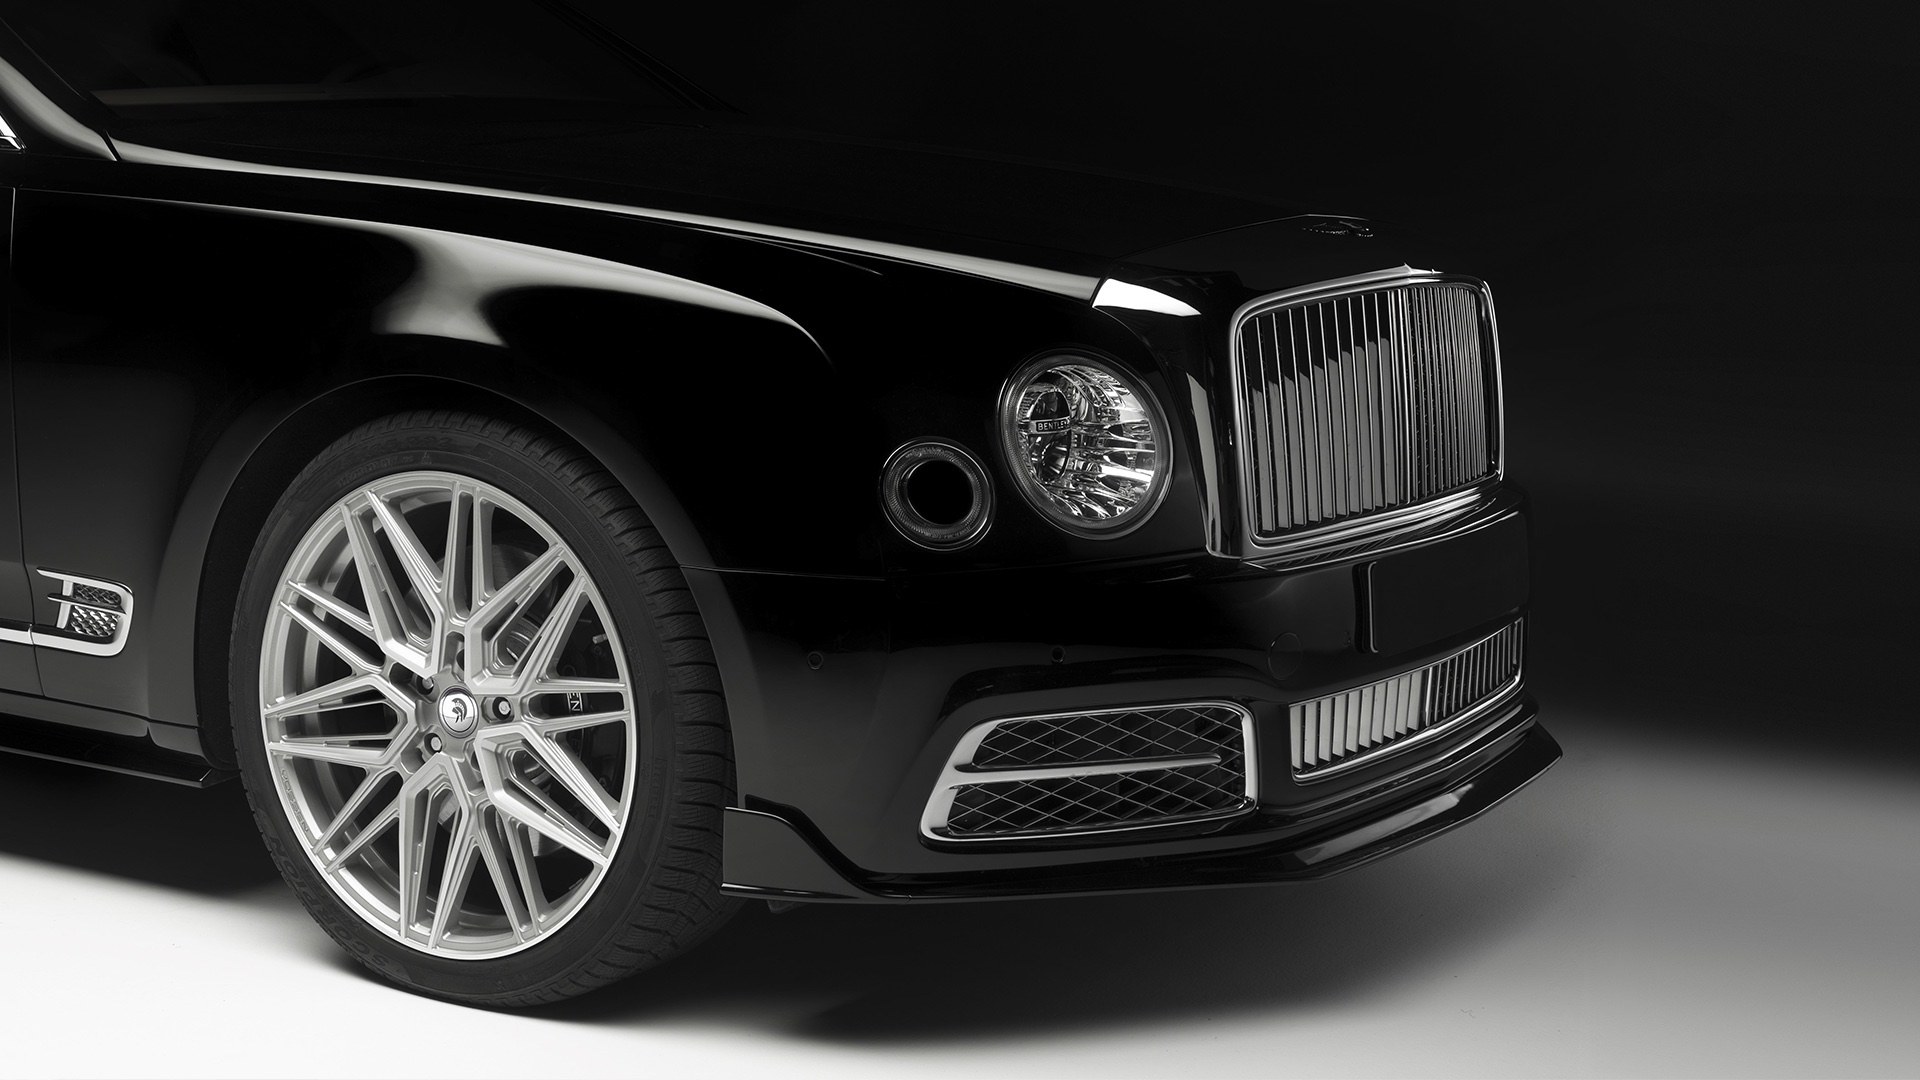 Bentley_Mulsanne_coupe_by_Ares_Modena-2